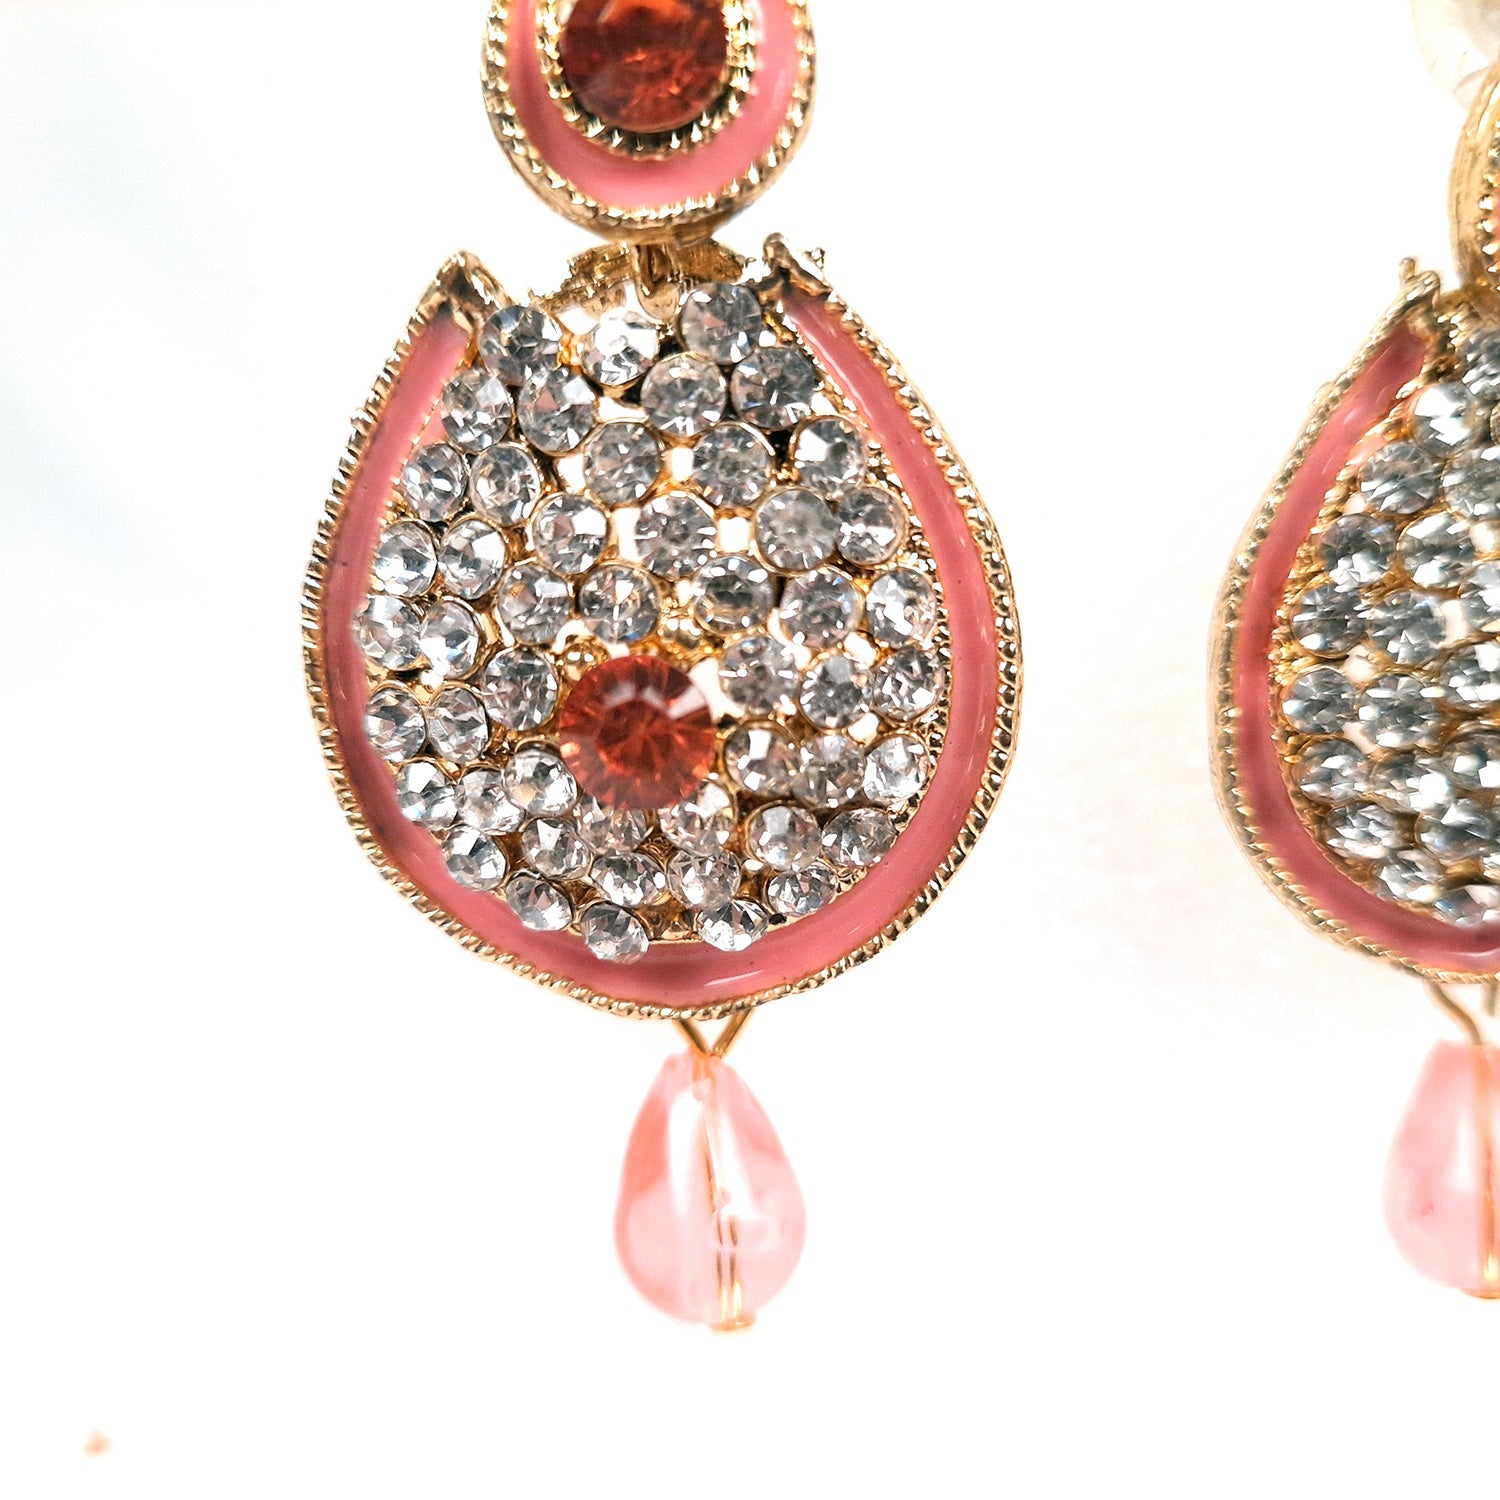 Earrings - Pink Dangle Chandelier | American Diamond Jewelry | Latest Stylish Fashion Jewellery | Gifts for Her, Friendship Day, Valentine's Day Gift - apkamart